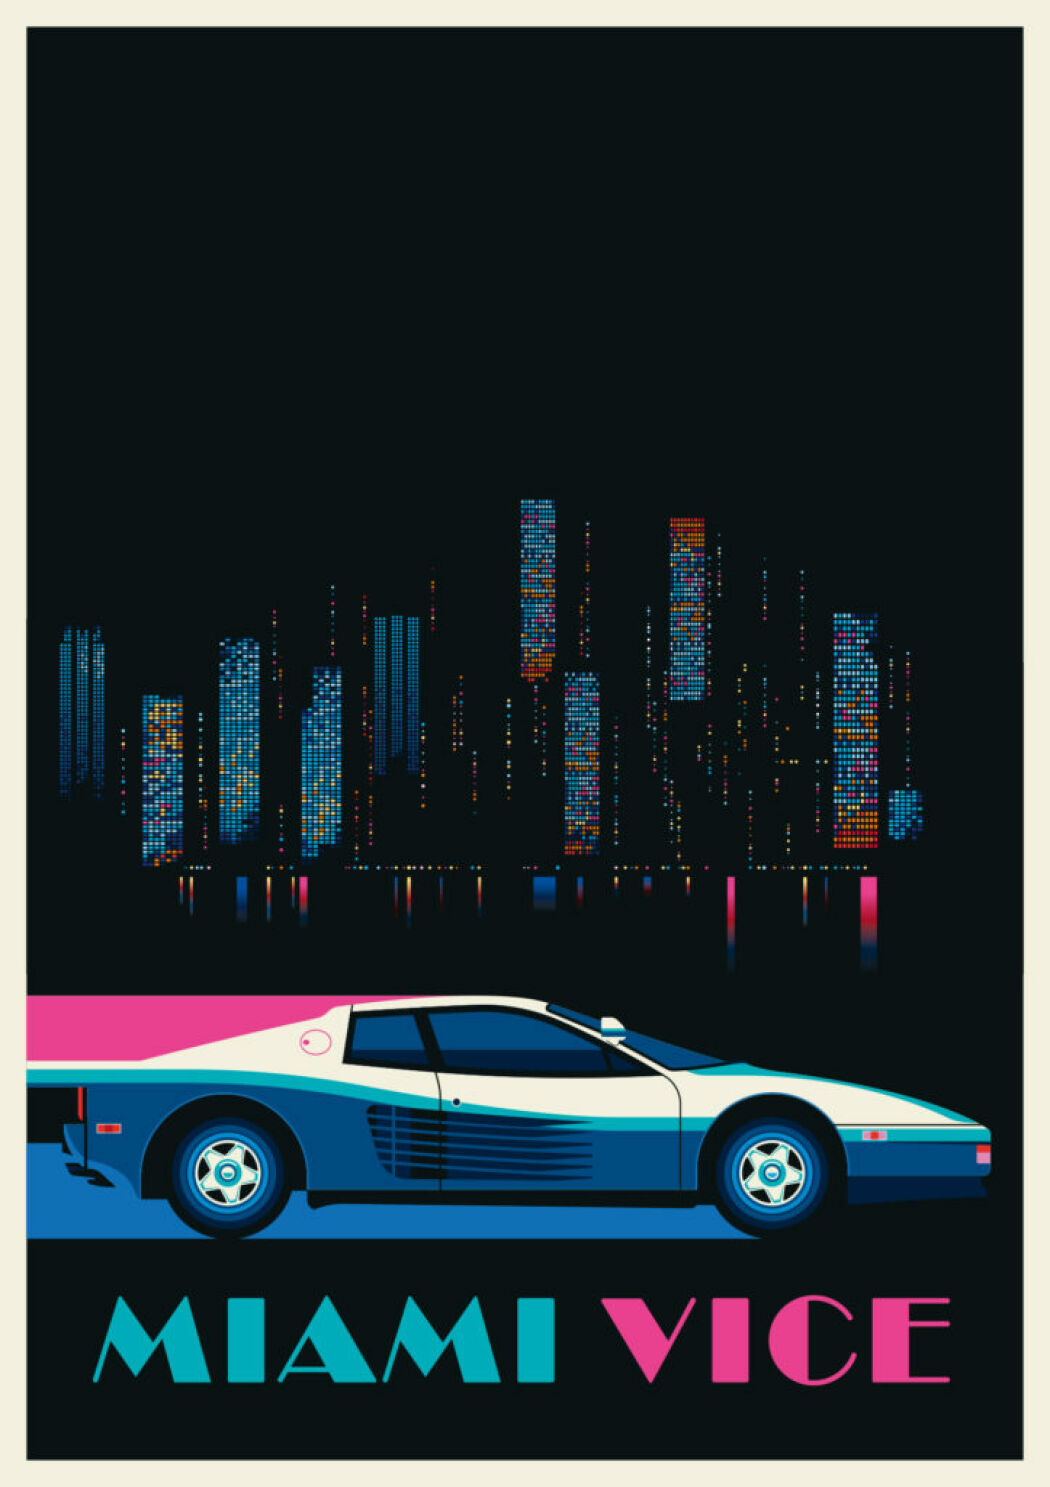 Miami Vice illustration by Bo Lundberg for Universal Pictures